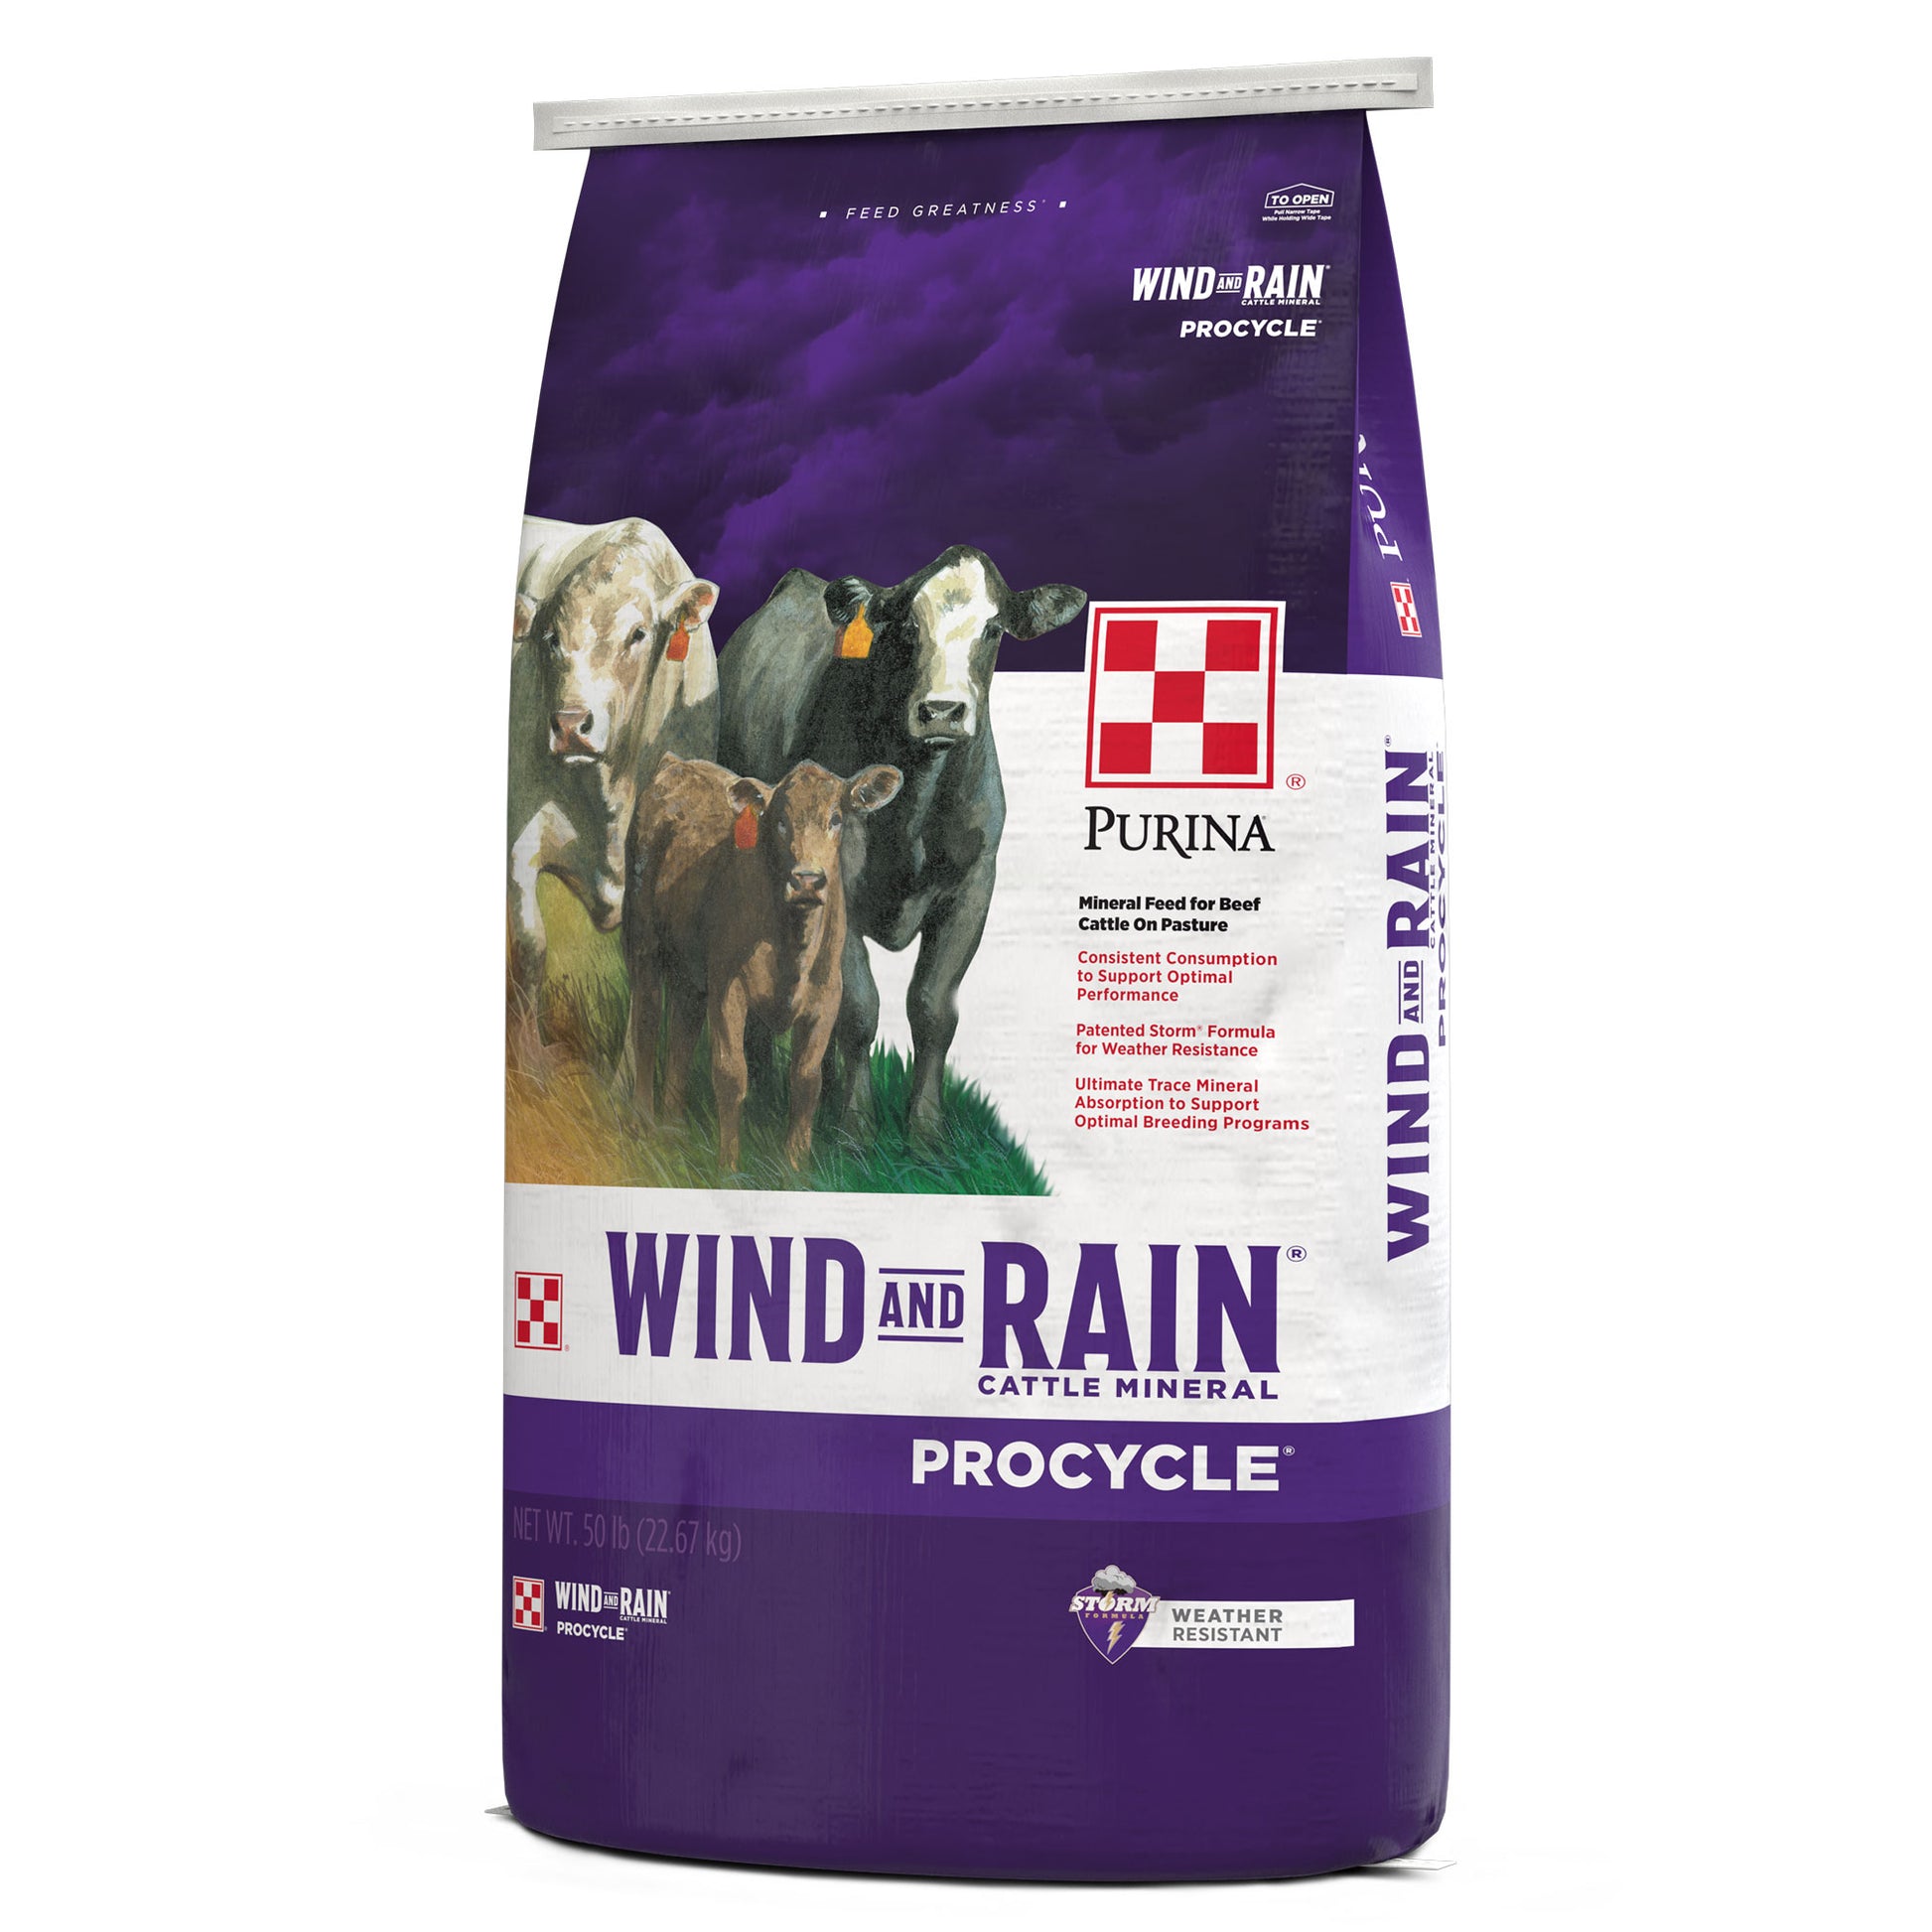 Right Angle of Wind and Rain Procycle 50 Pound Bag